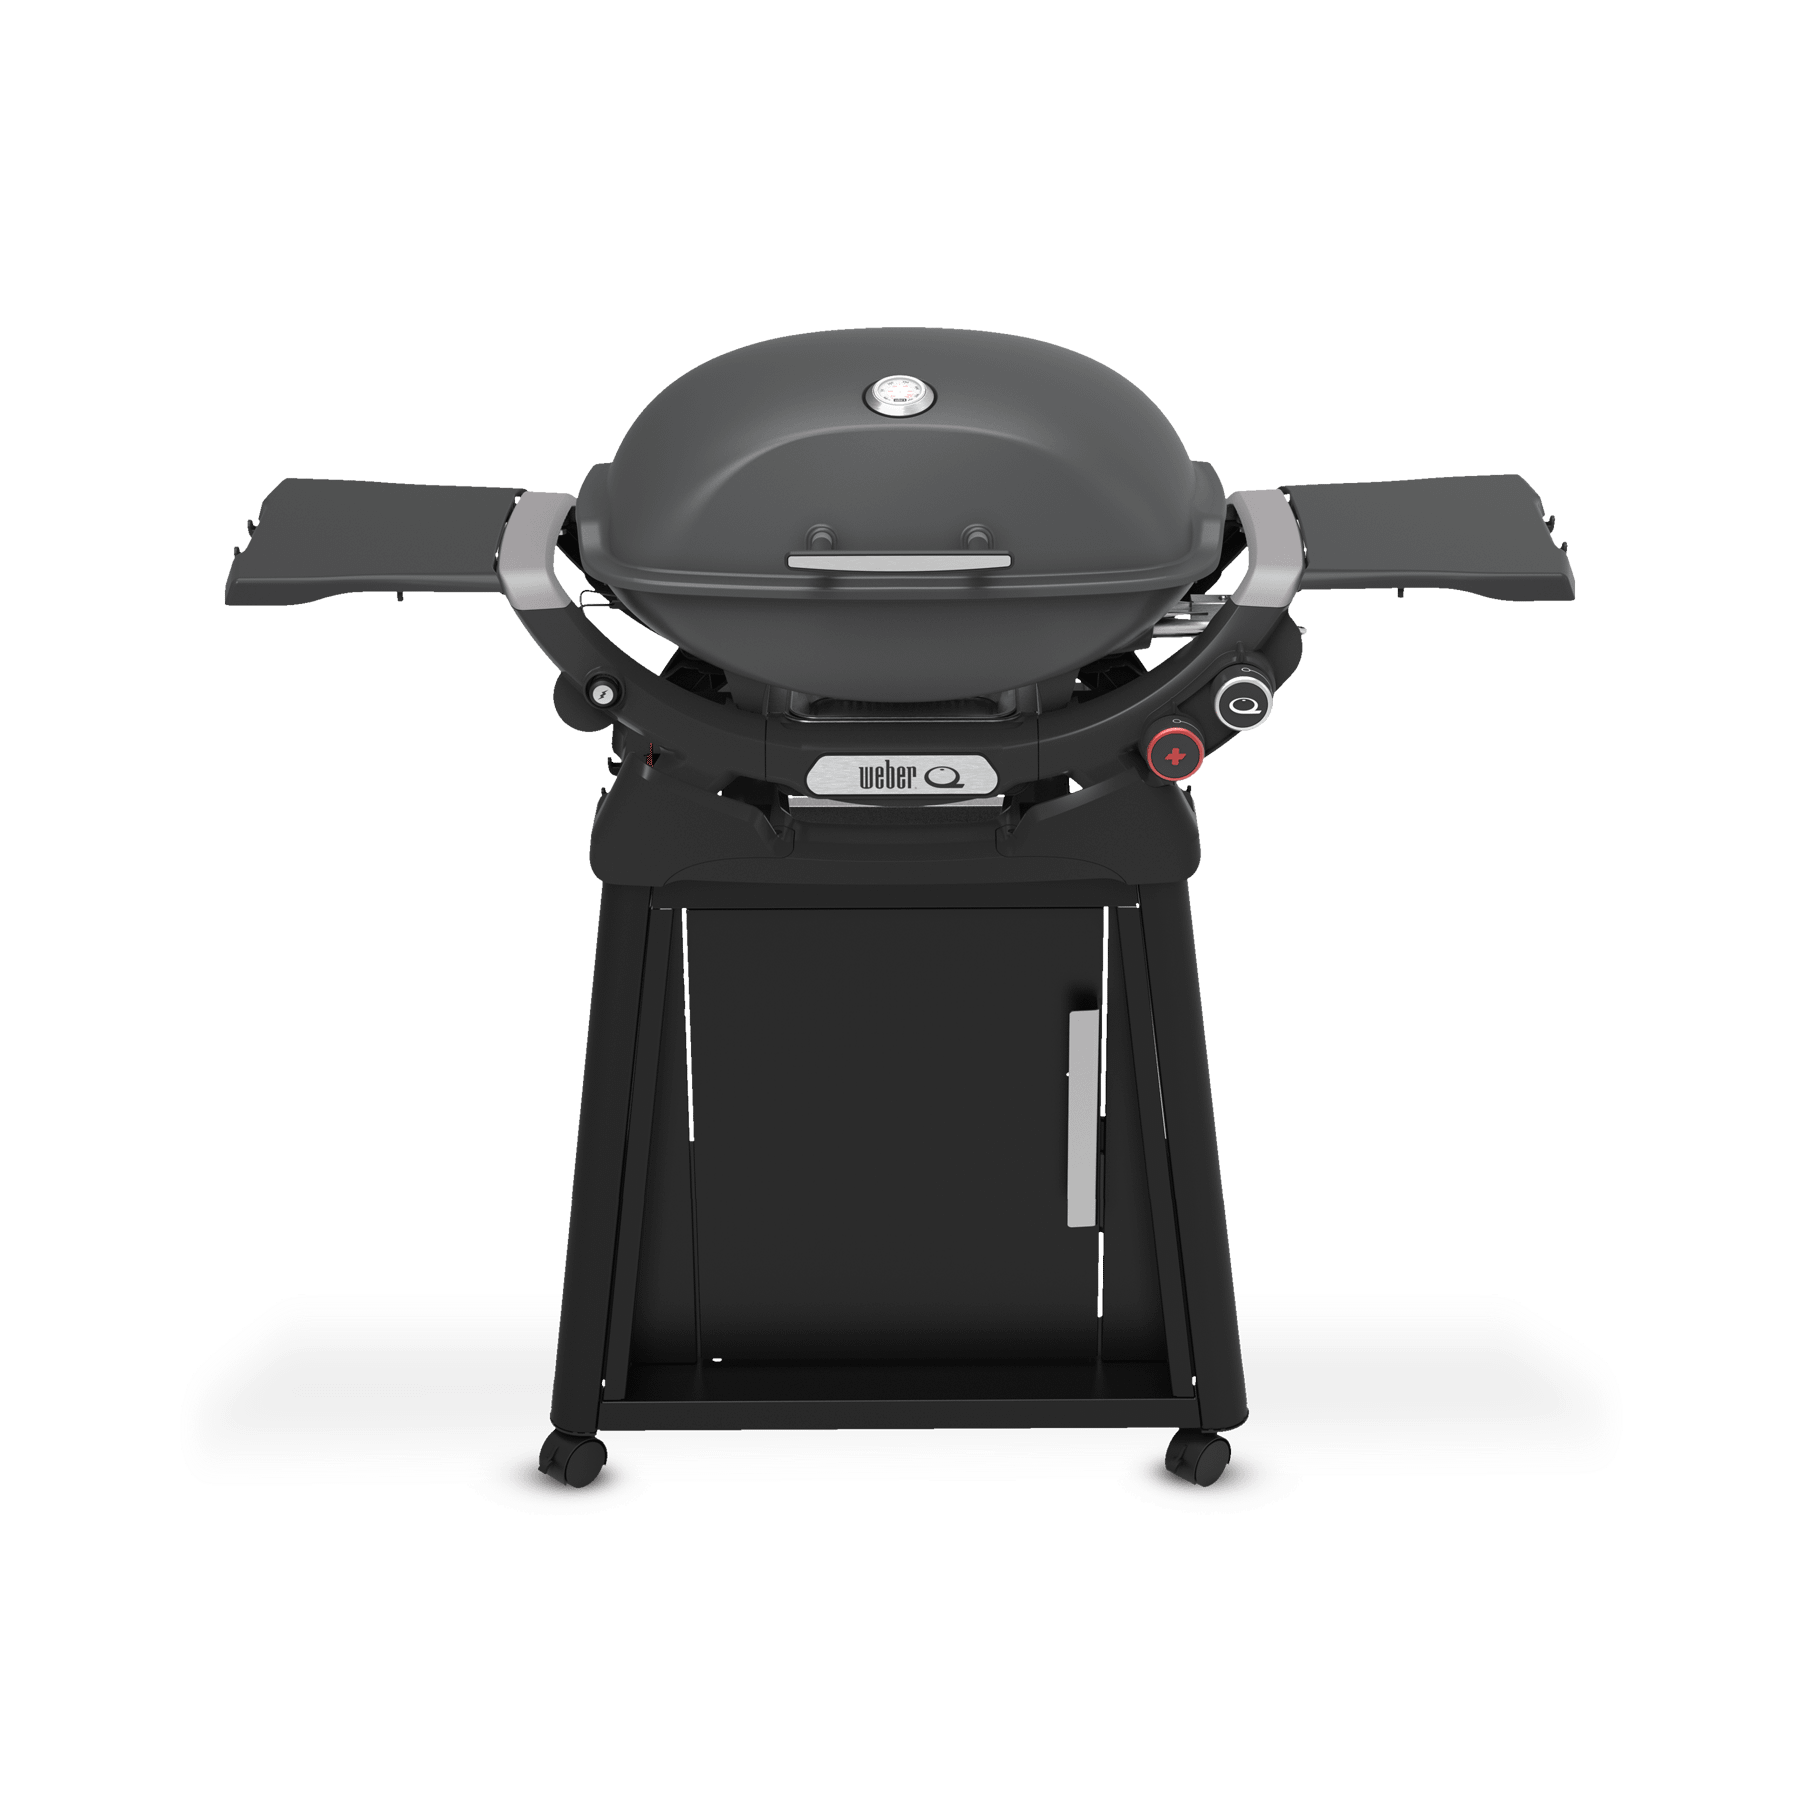 Weber 1500393 Q 2800N+ Gas Grill With Stand (Liquid Propane) - Charcoal Grey